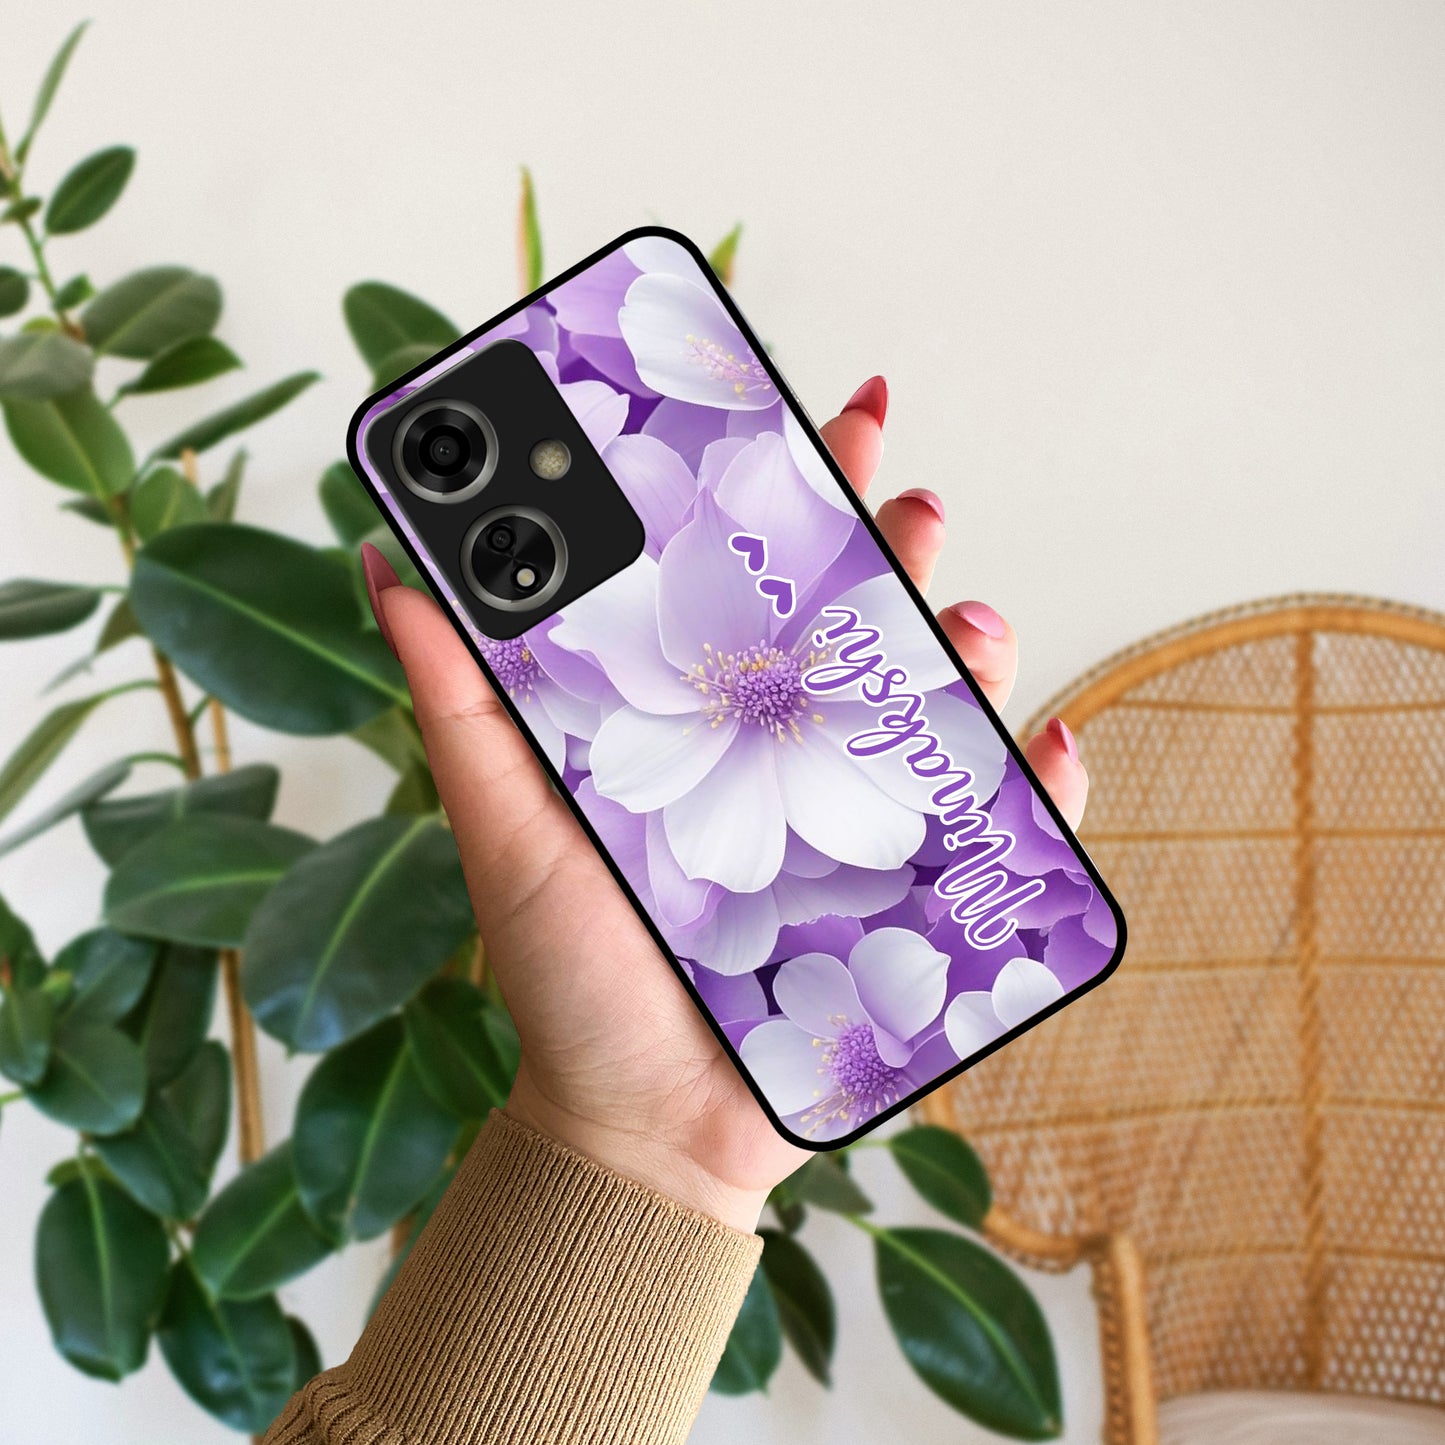 Awesome Purple Floral Glossy Customised Metal Case Cover For Oppo